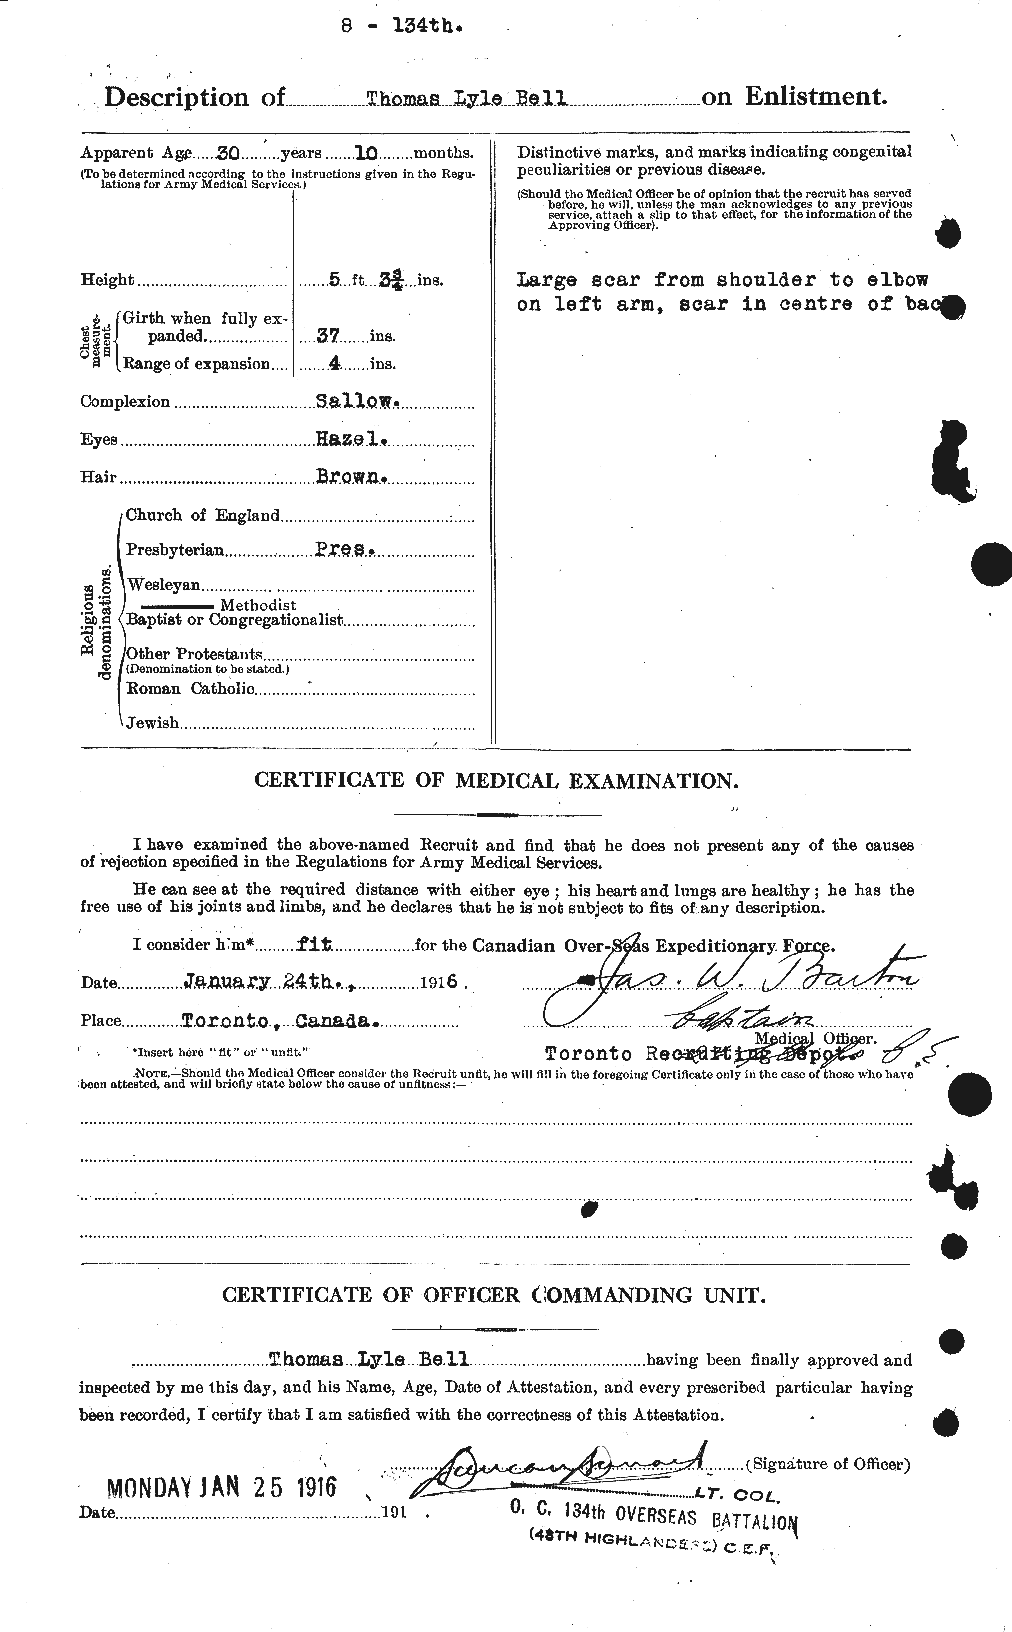 Personnel Records of the First World War - CEF 234765b